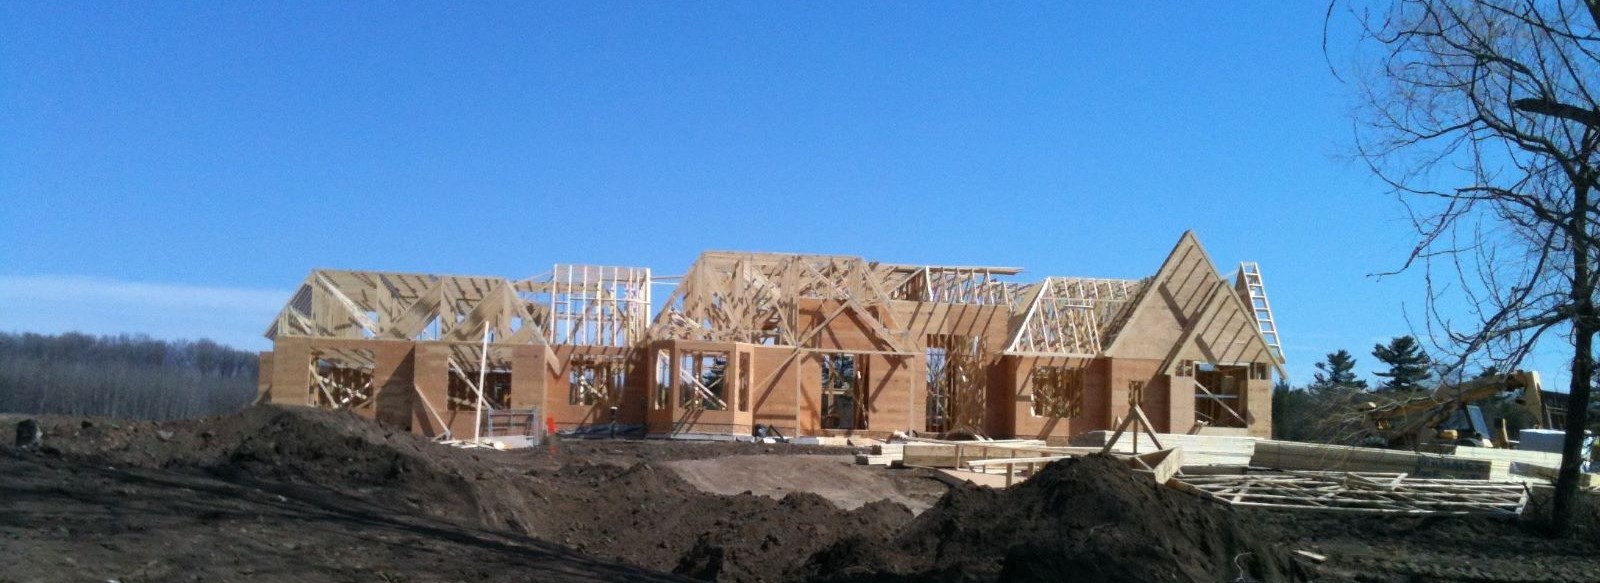 a house in the process of being built - framing of the house completed